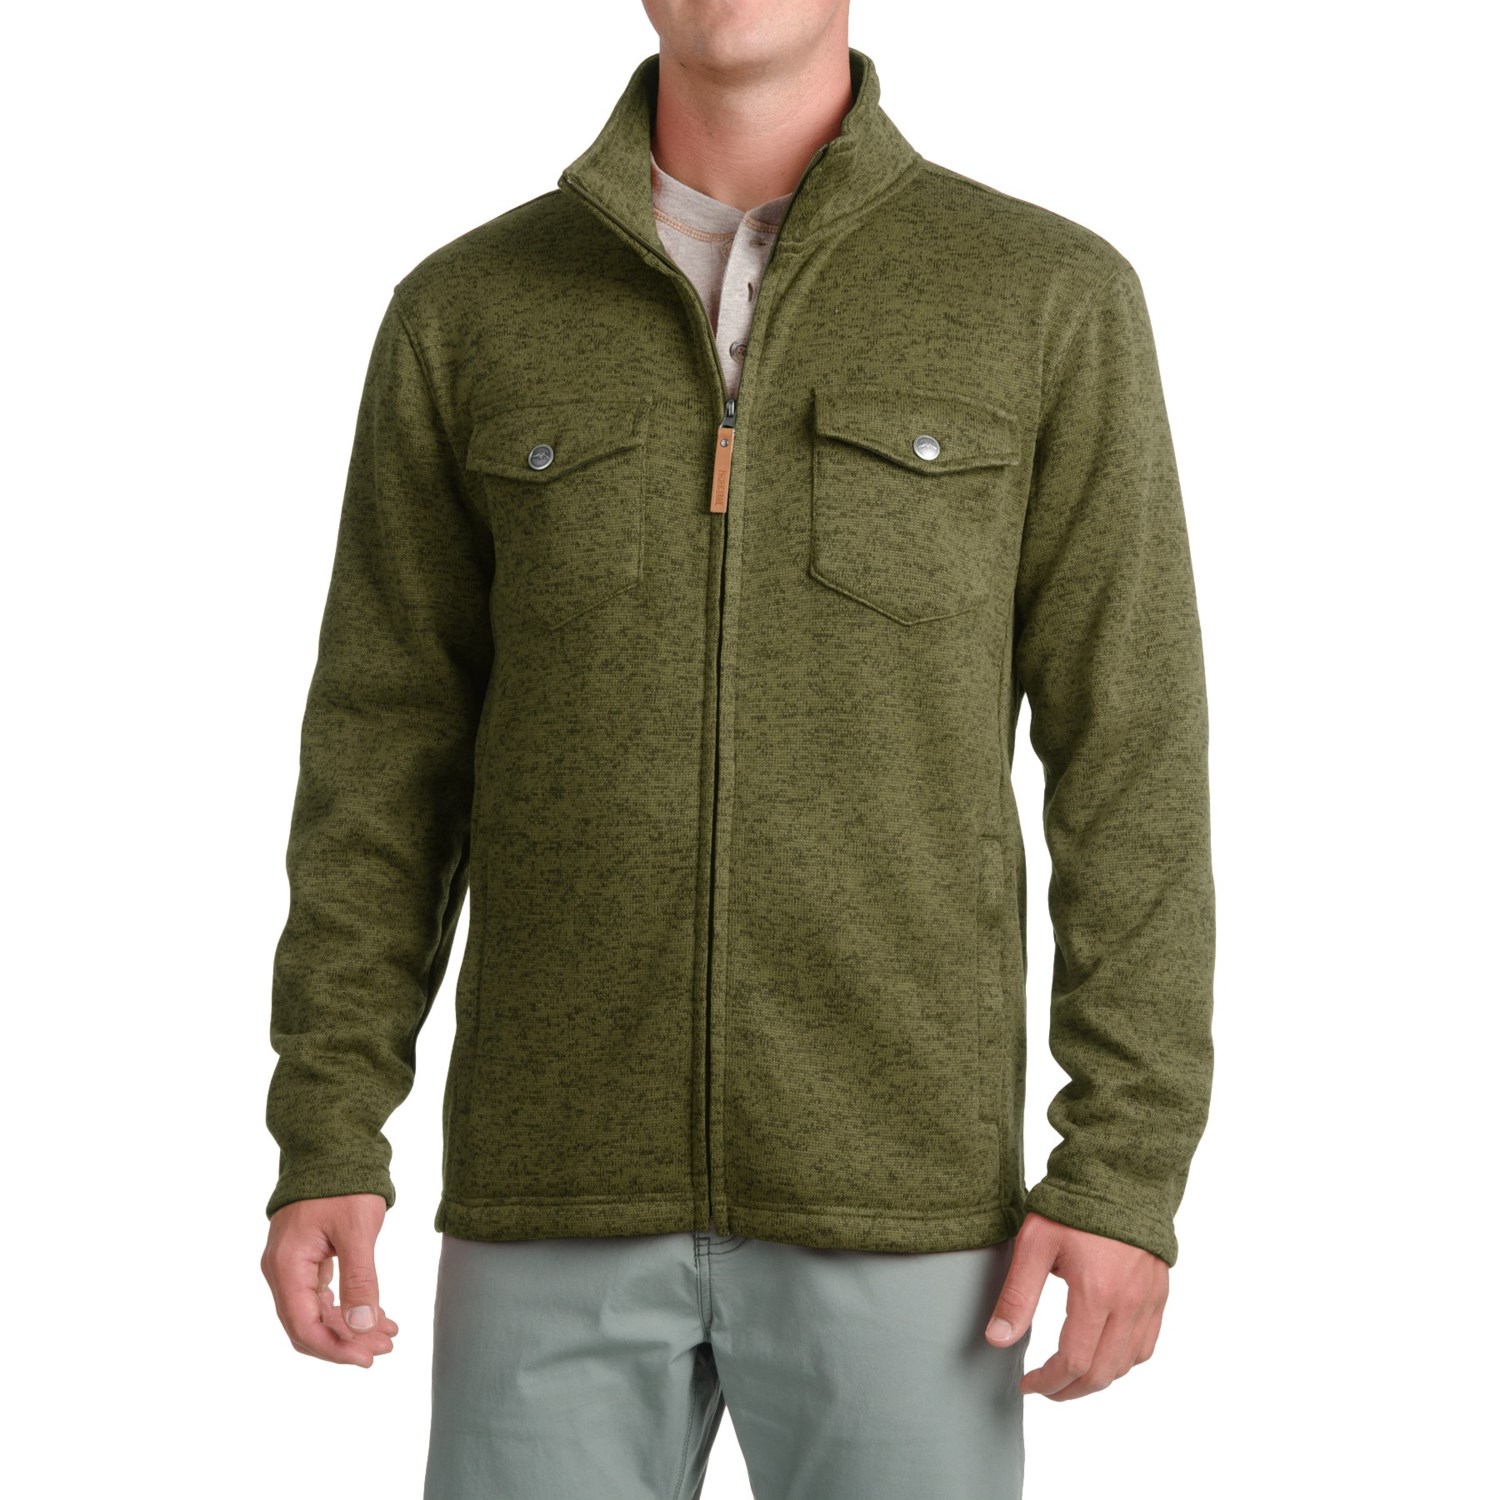 Pacific Trail Fleece Shirt Jacket (For Men) - Save 70%